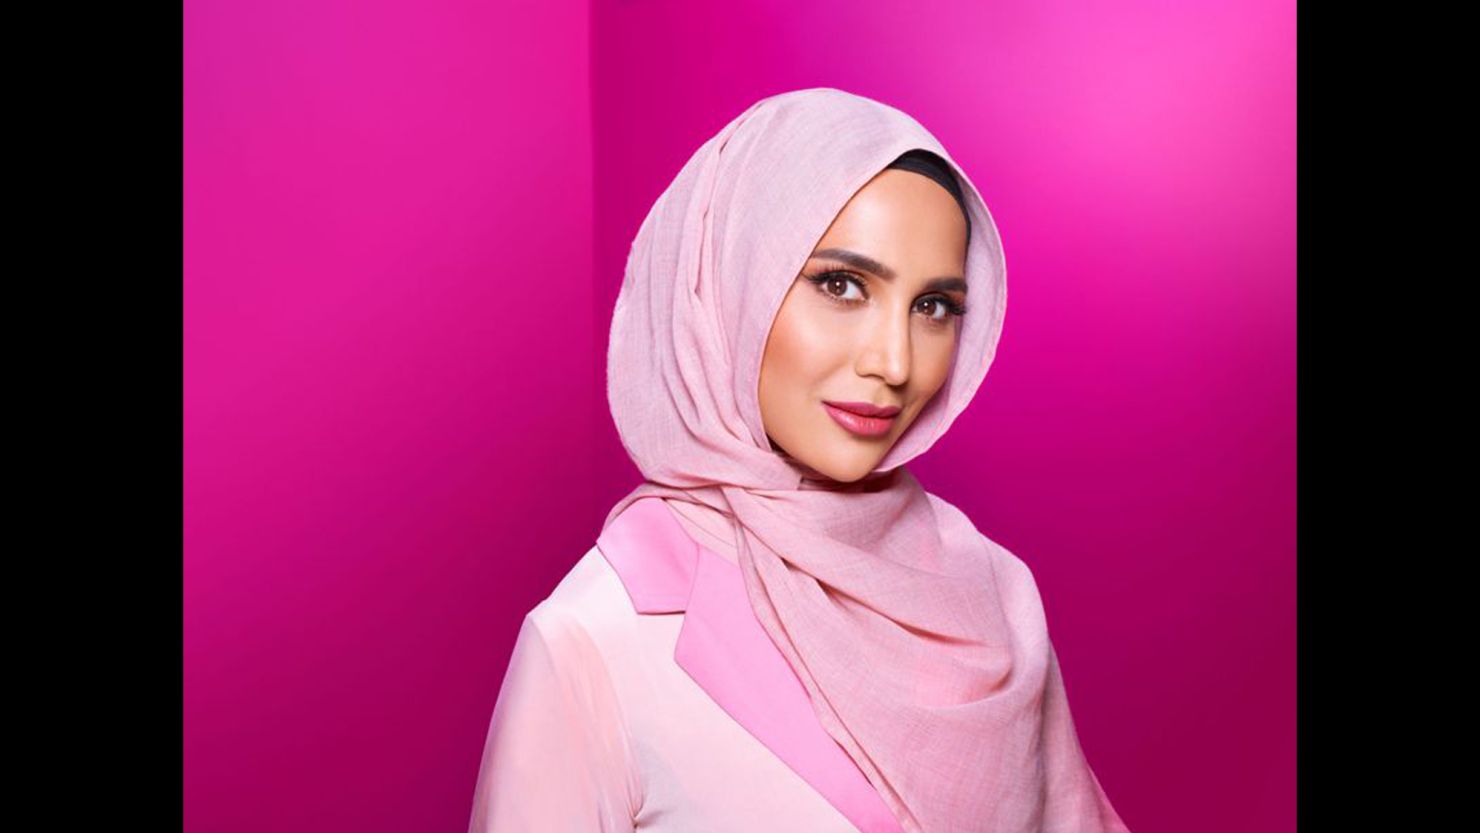 Amena Khan is featured in new L'Oreal Paris haircare ad campaign.